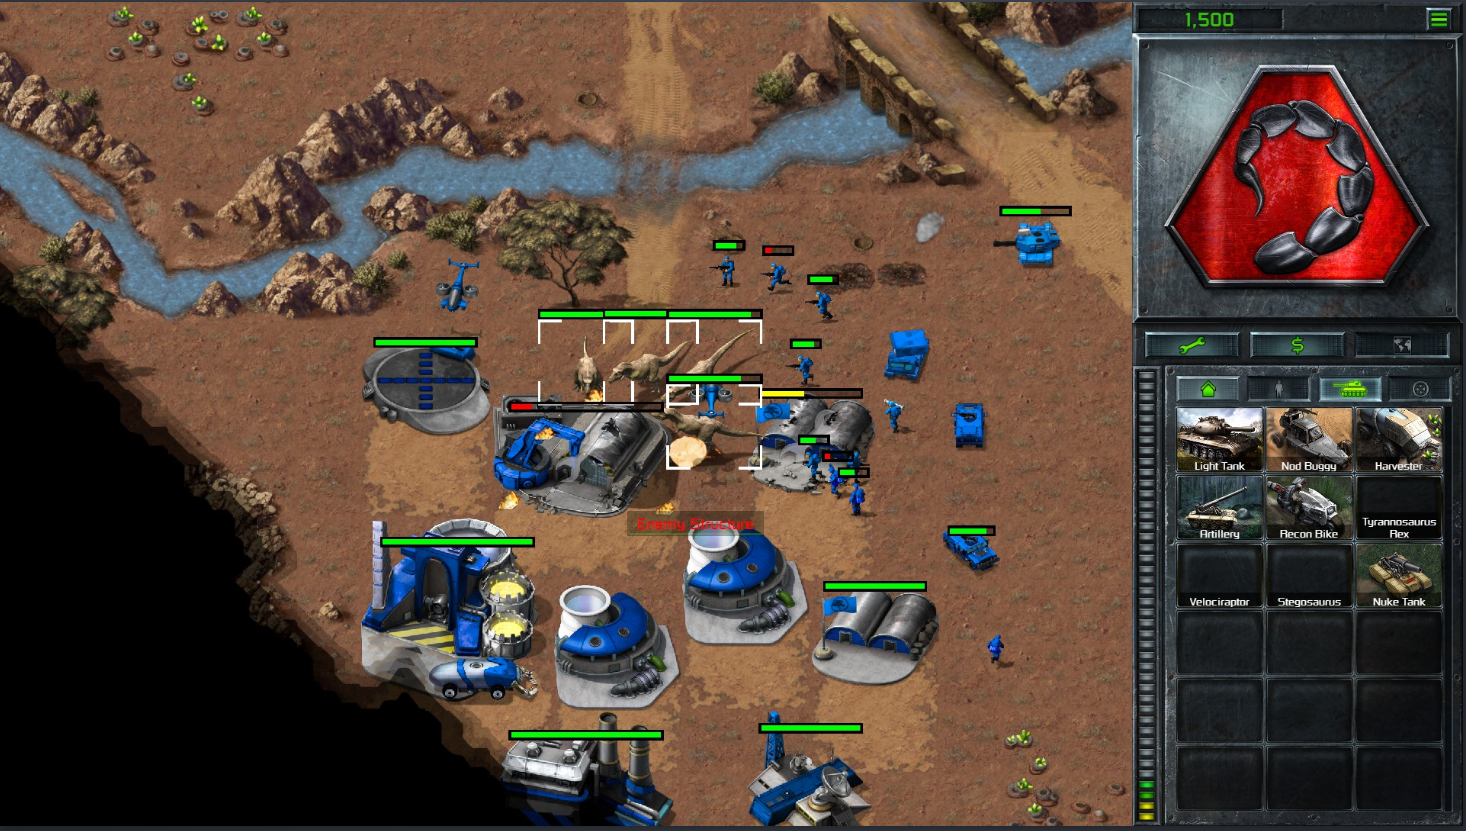 Command and conquer remastered. Command & Conquer Remastered collection. Command Conquer Remastered collection 2020. Command & Conquer Remastered collection юниты. C&C Red Alert Remastered 2020.